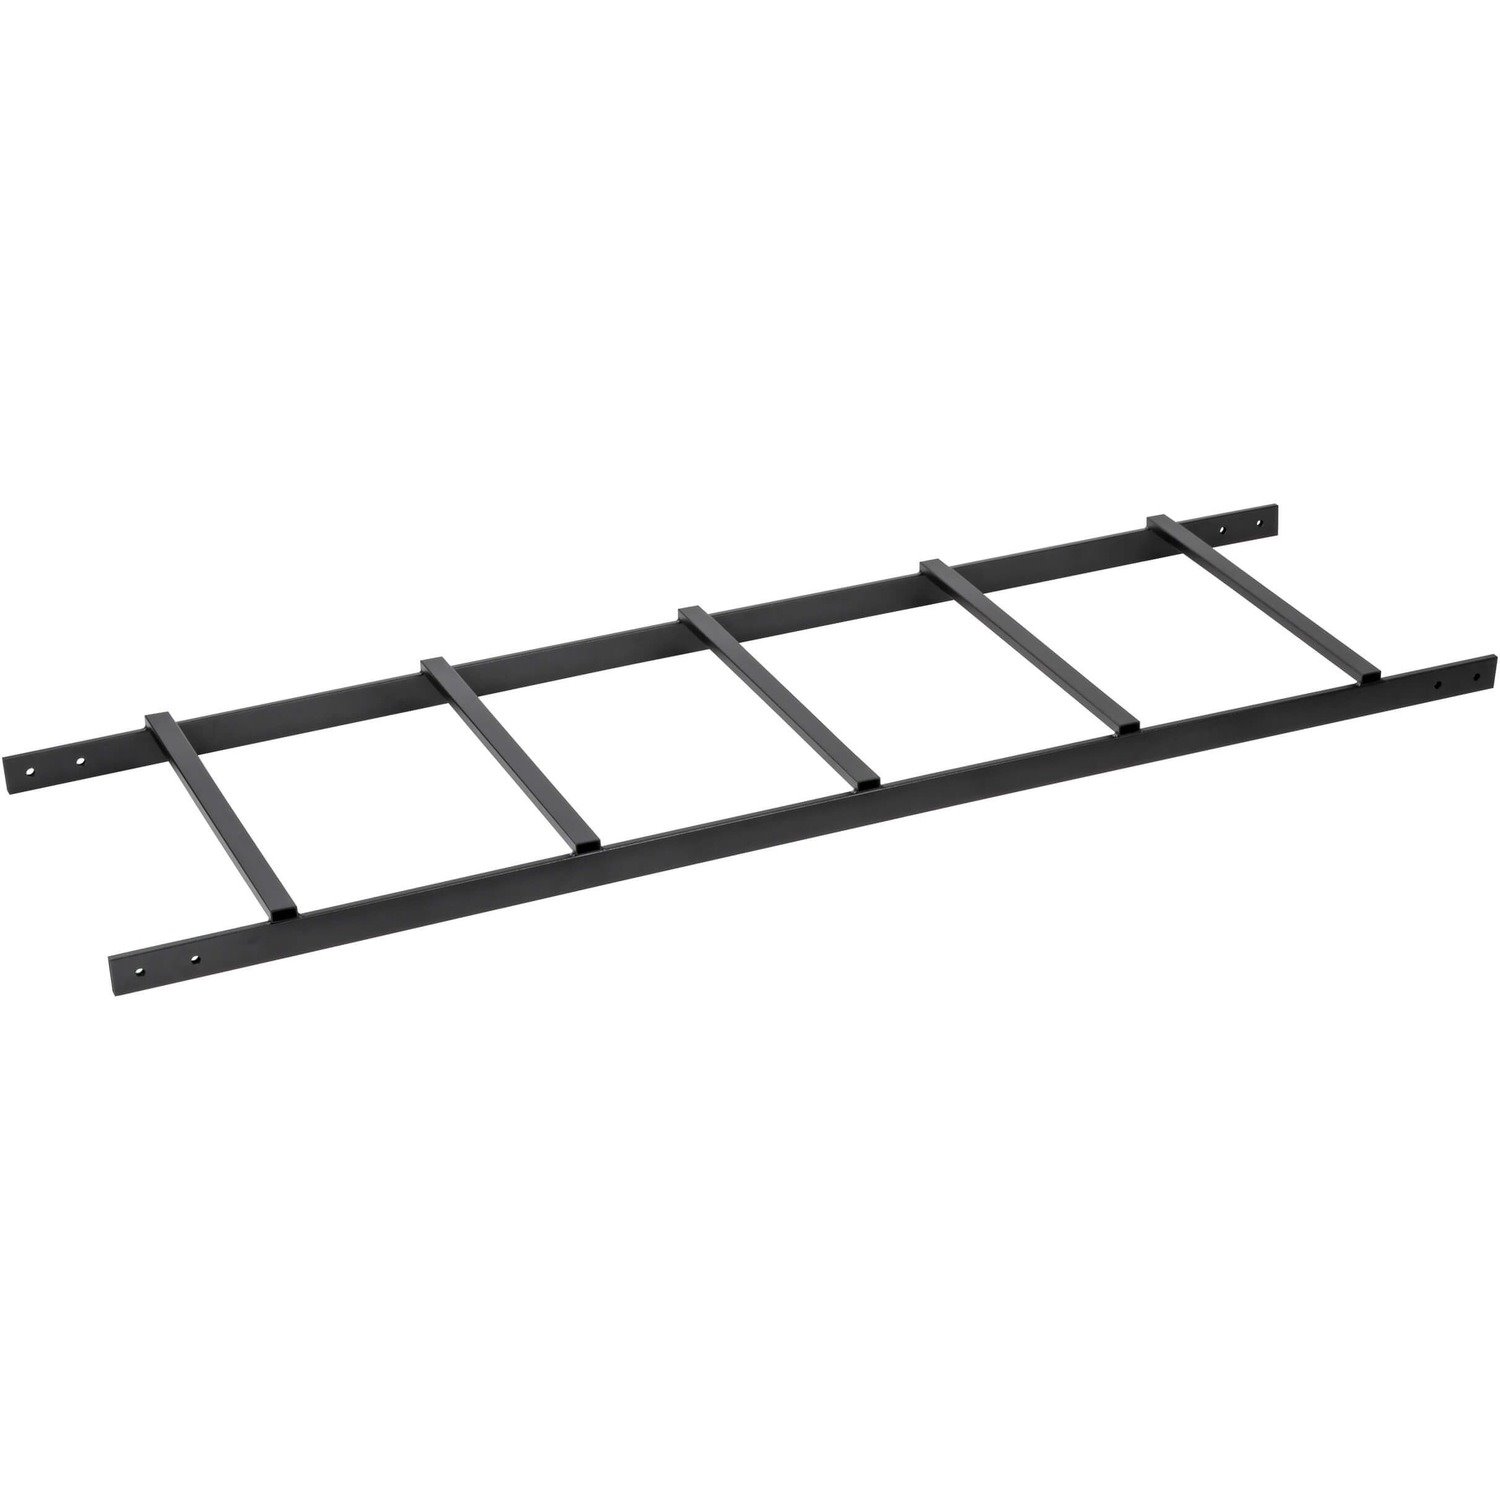 Tripp Lite SmartRack 10-ft. x 1-ft. (3 m x 0.3 m) Cable Ladder 2 sections SRCABLETRAY/SRLADDERATTACH needed